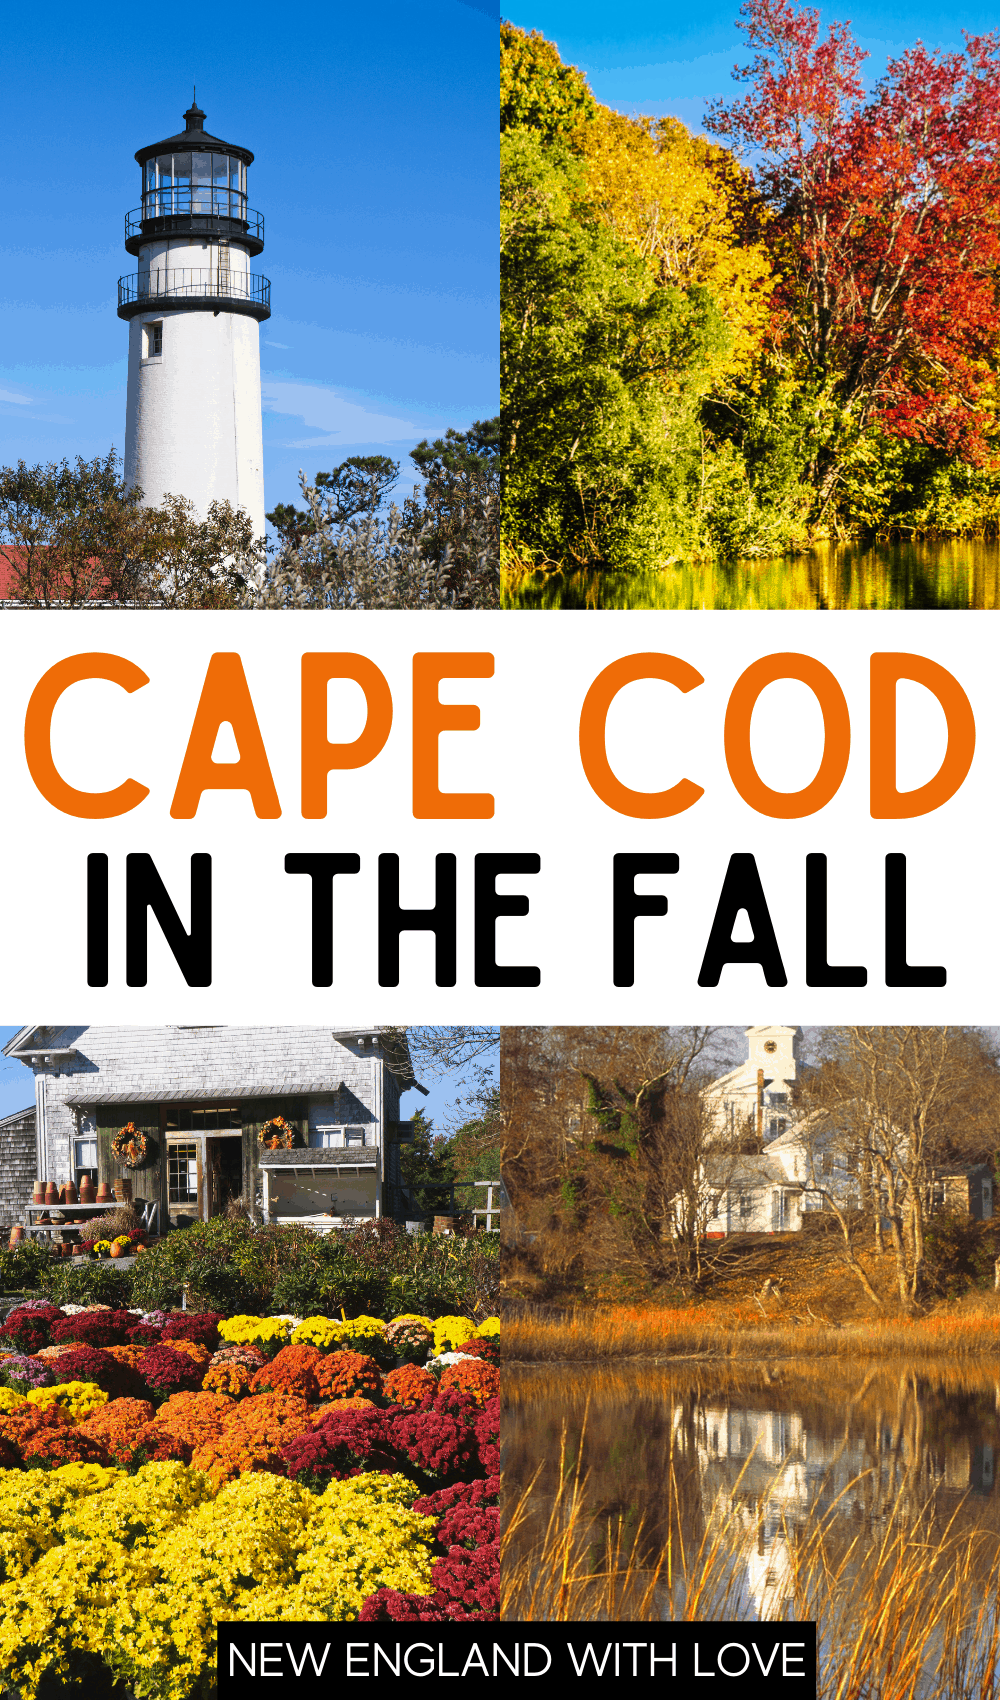 Pinterest graphic reading "CAPE COD IN THE FALL"